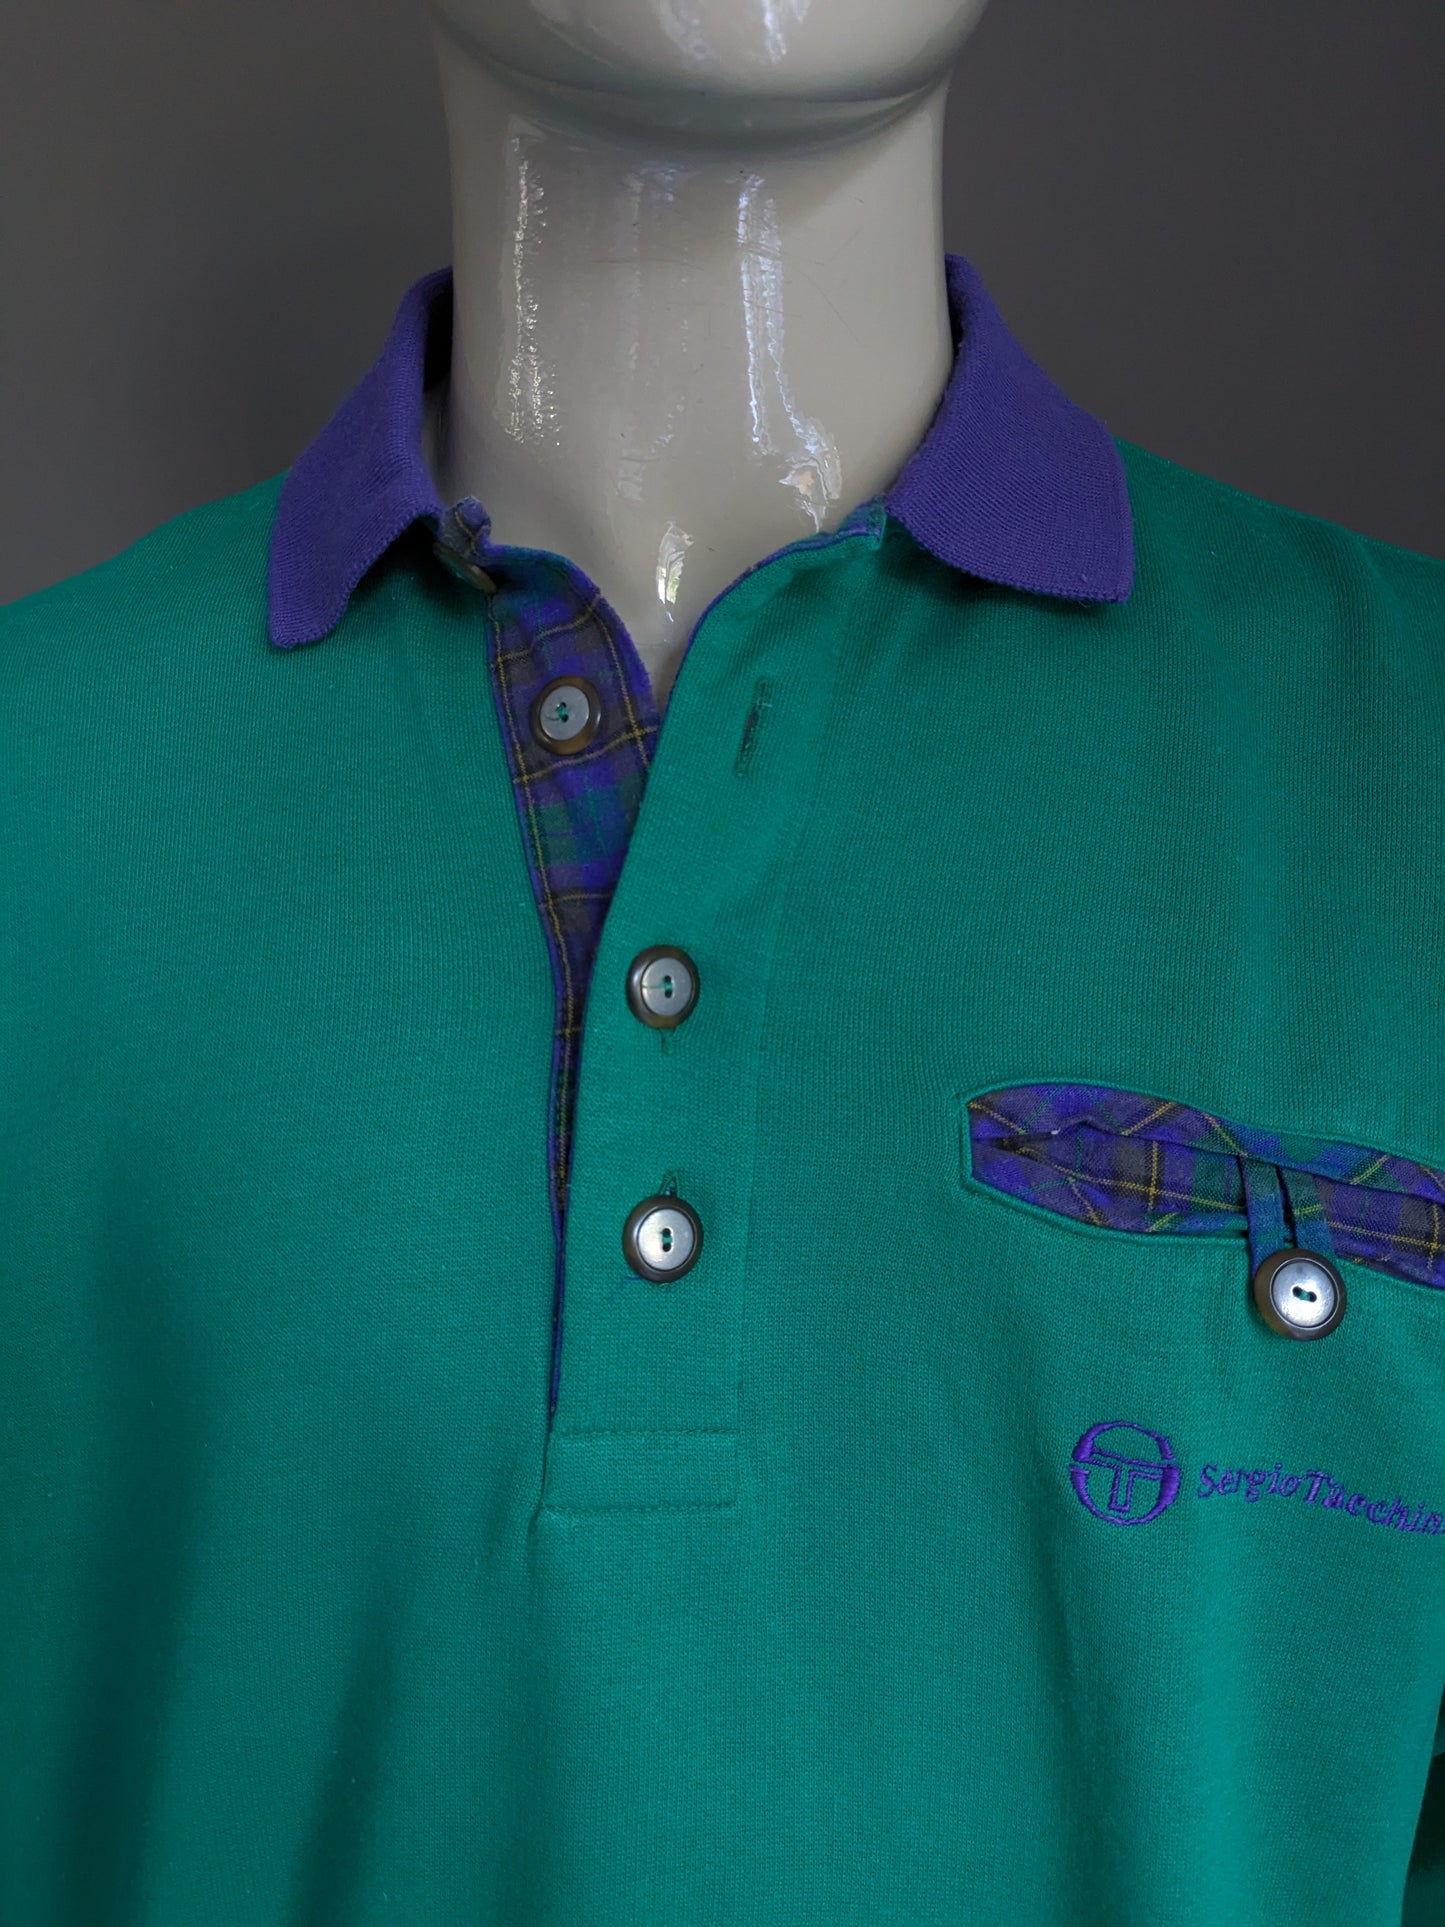 Vintage Sergio Tacchini polo sweater with elastic band. Green purple colored. Size XL.